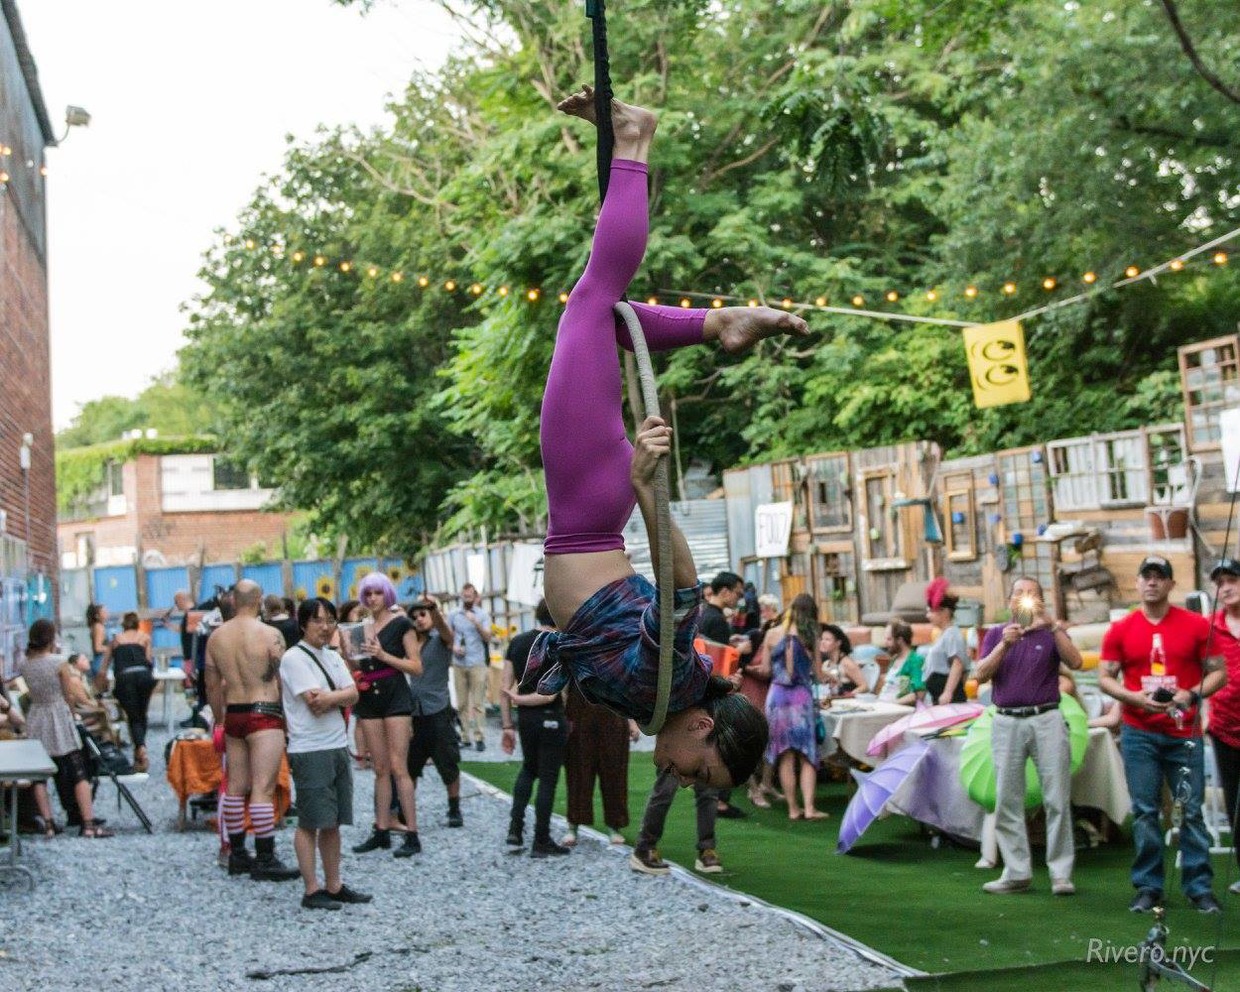 The Muse, Bushwick’s Own Circus, Needs Crowdfunding Support